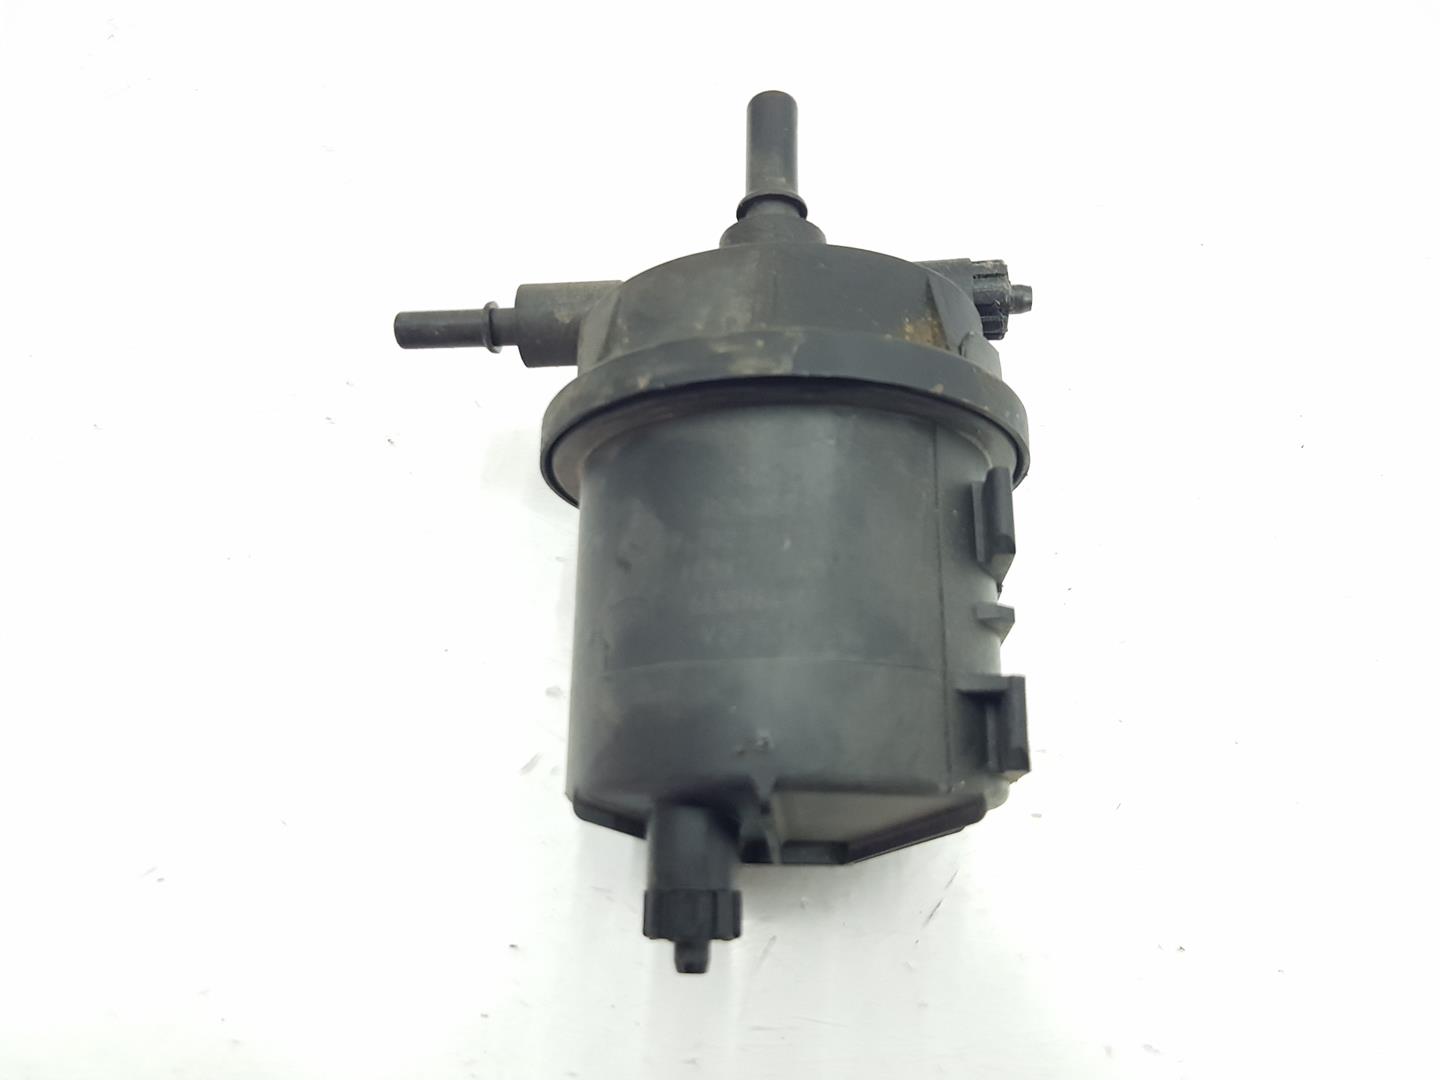 RENAULT Kangoo 1 generation (1998-2009) Other Engine Compartment Parts 7700116169, 6610964161 19808594